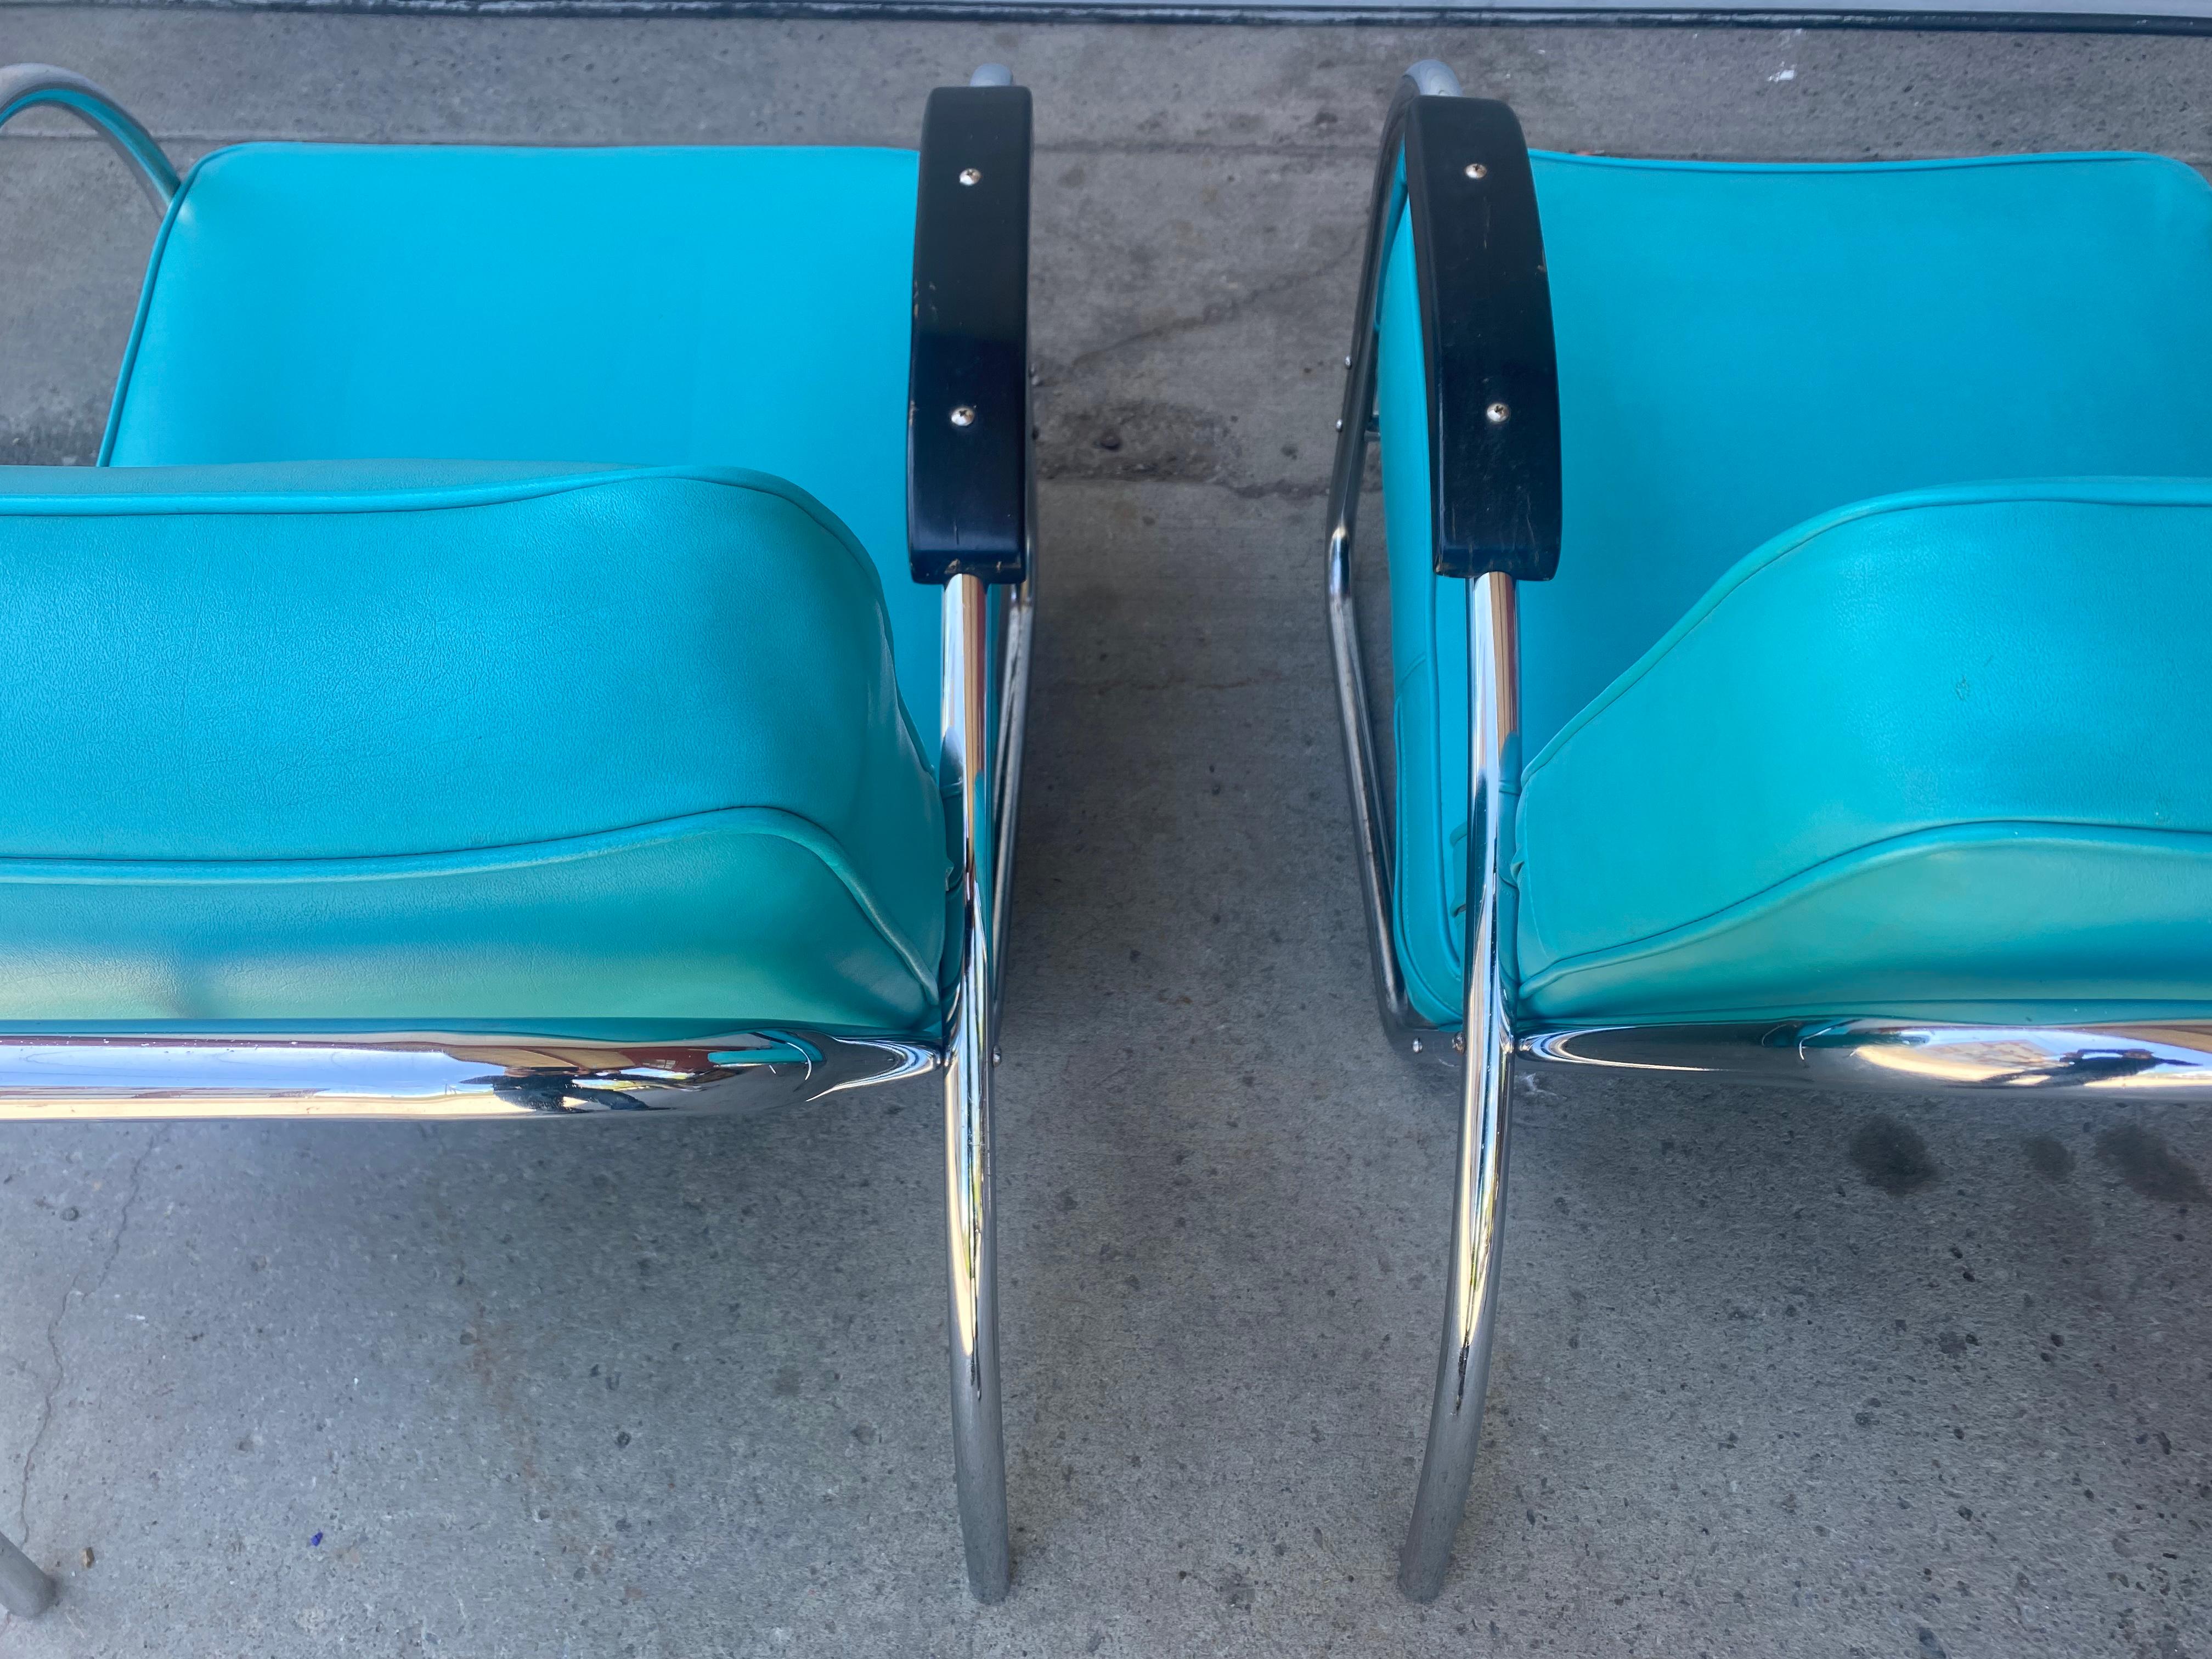 Pair American Art Deco / Streamline Chrome Lounge Chairs  by Royal Metal  In Good Condition For Sale In Buffalo, NY